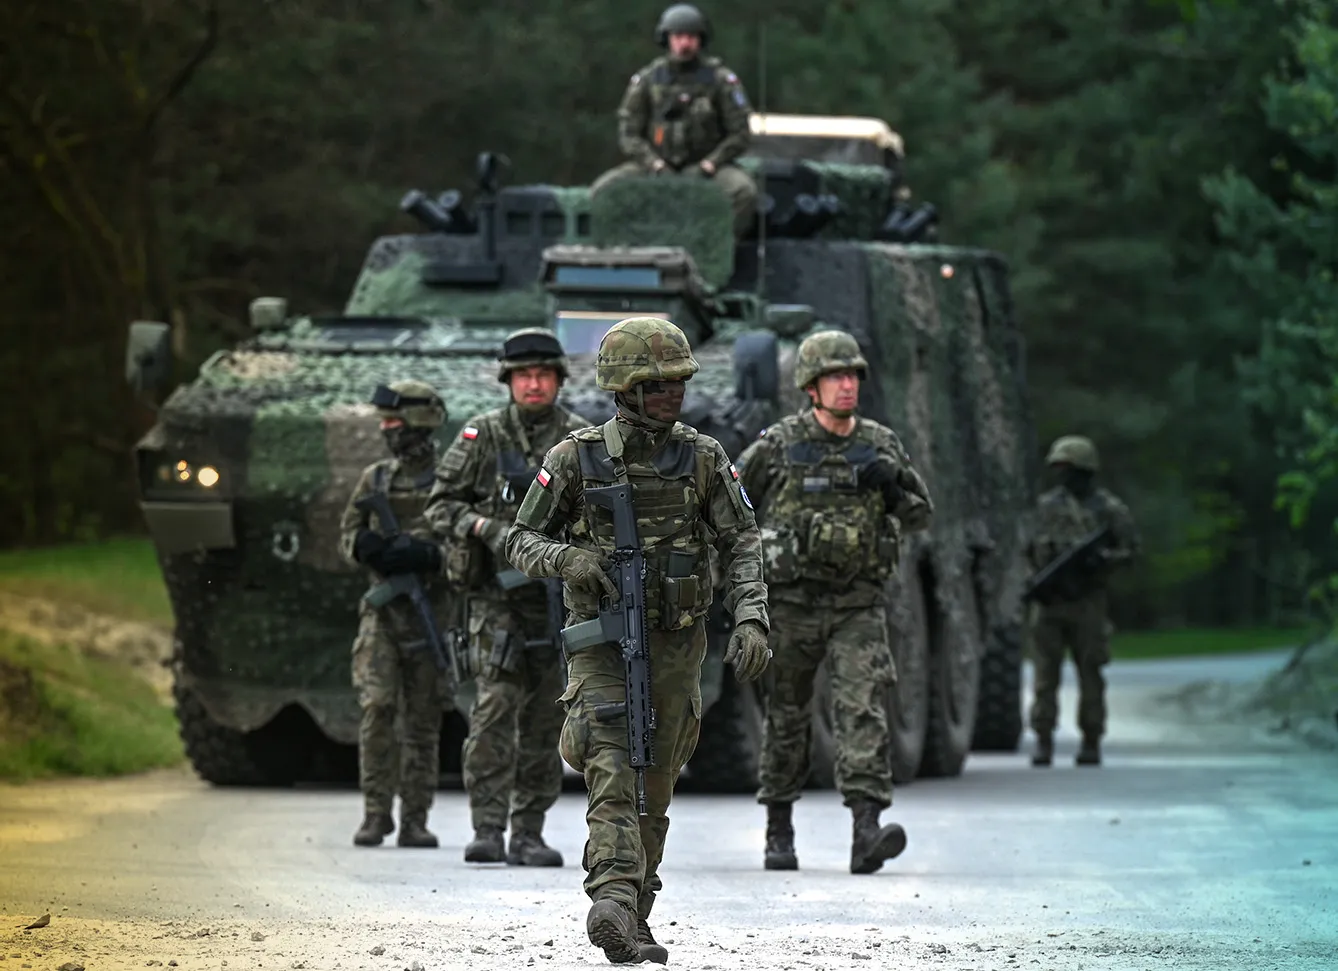 NOWA DEBA, POLAND - May 6, 2023: Polish soldiers seen before a high-intensity training session using M1A2 Abrams tanks at Nowa Deba training ground, on May 6, 2023, in Nowa Deba, Poland. The Anakonda-23 exercise kicks off in Nowa Deba, marking the pinnacle of the Polish Army's training calendar this year. From F-16 aircraft to W-3 SOKOL helicopters, GROM missile systems, RAK self-propelled mortars, KRAB howitzers, SPIKE anti-tank guided missiles, and LANGUSTA launchers, soldiers from various units in the Polish Army, along with counterparts from the United States, Romania, and Slovenia, will come together to train and collaborate towards achieving military excellence.